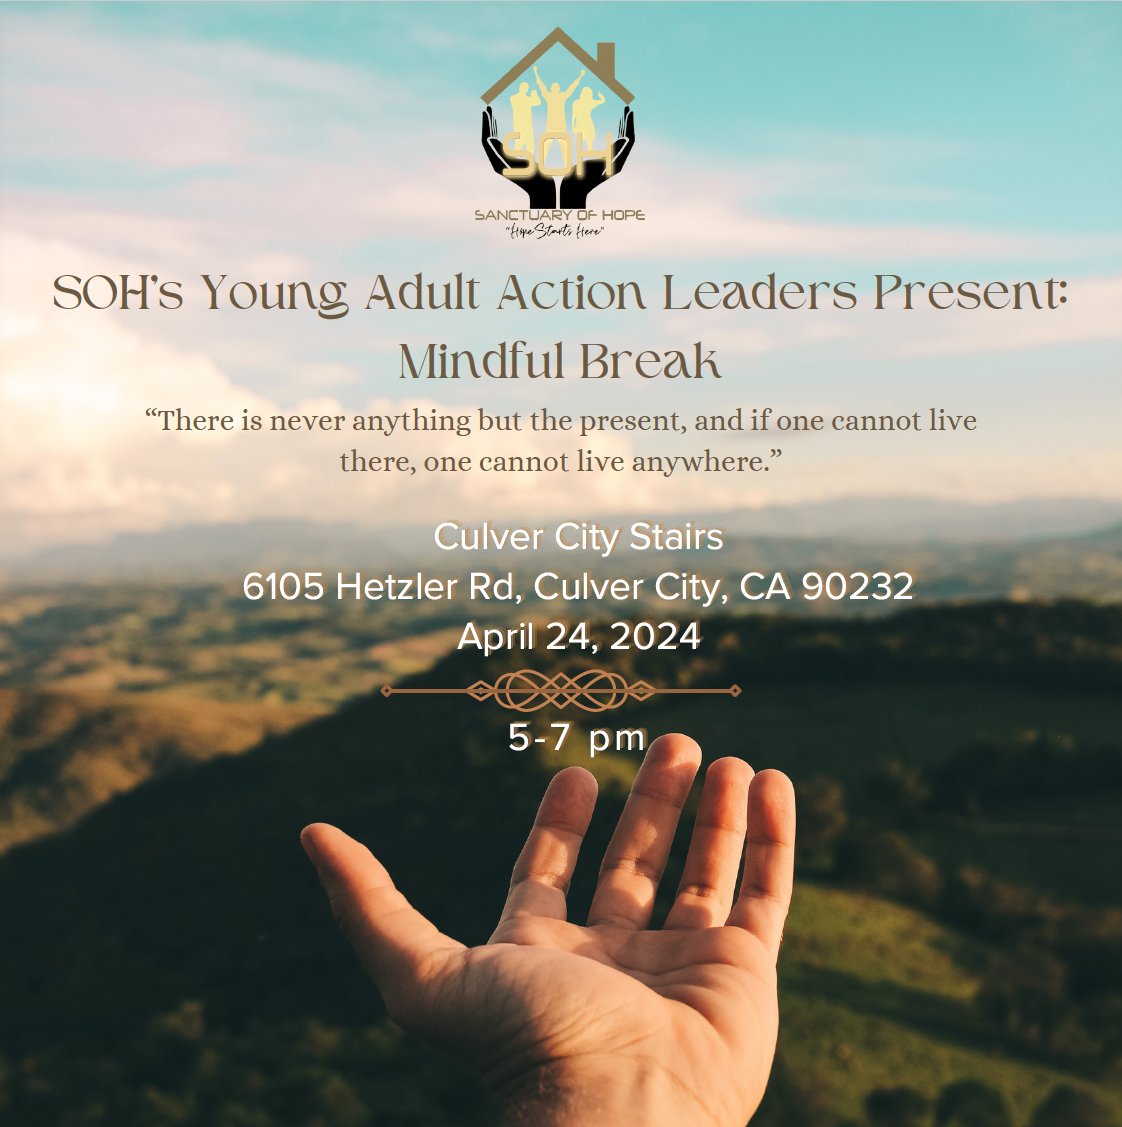 Join our Young Adults Leaders mindful break on the Culver City stairs on April 24th 🧘‍♂️🌿 #Mindfulness #SelfCare #CulverCityStairs #YoungAdults #WellnessDay